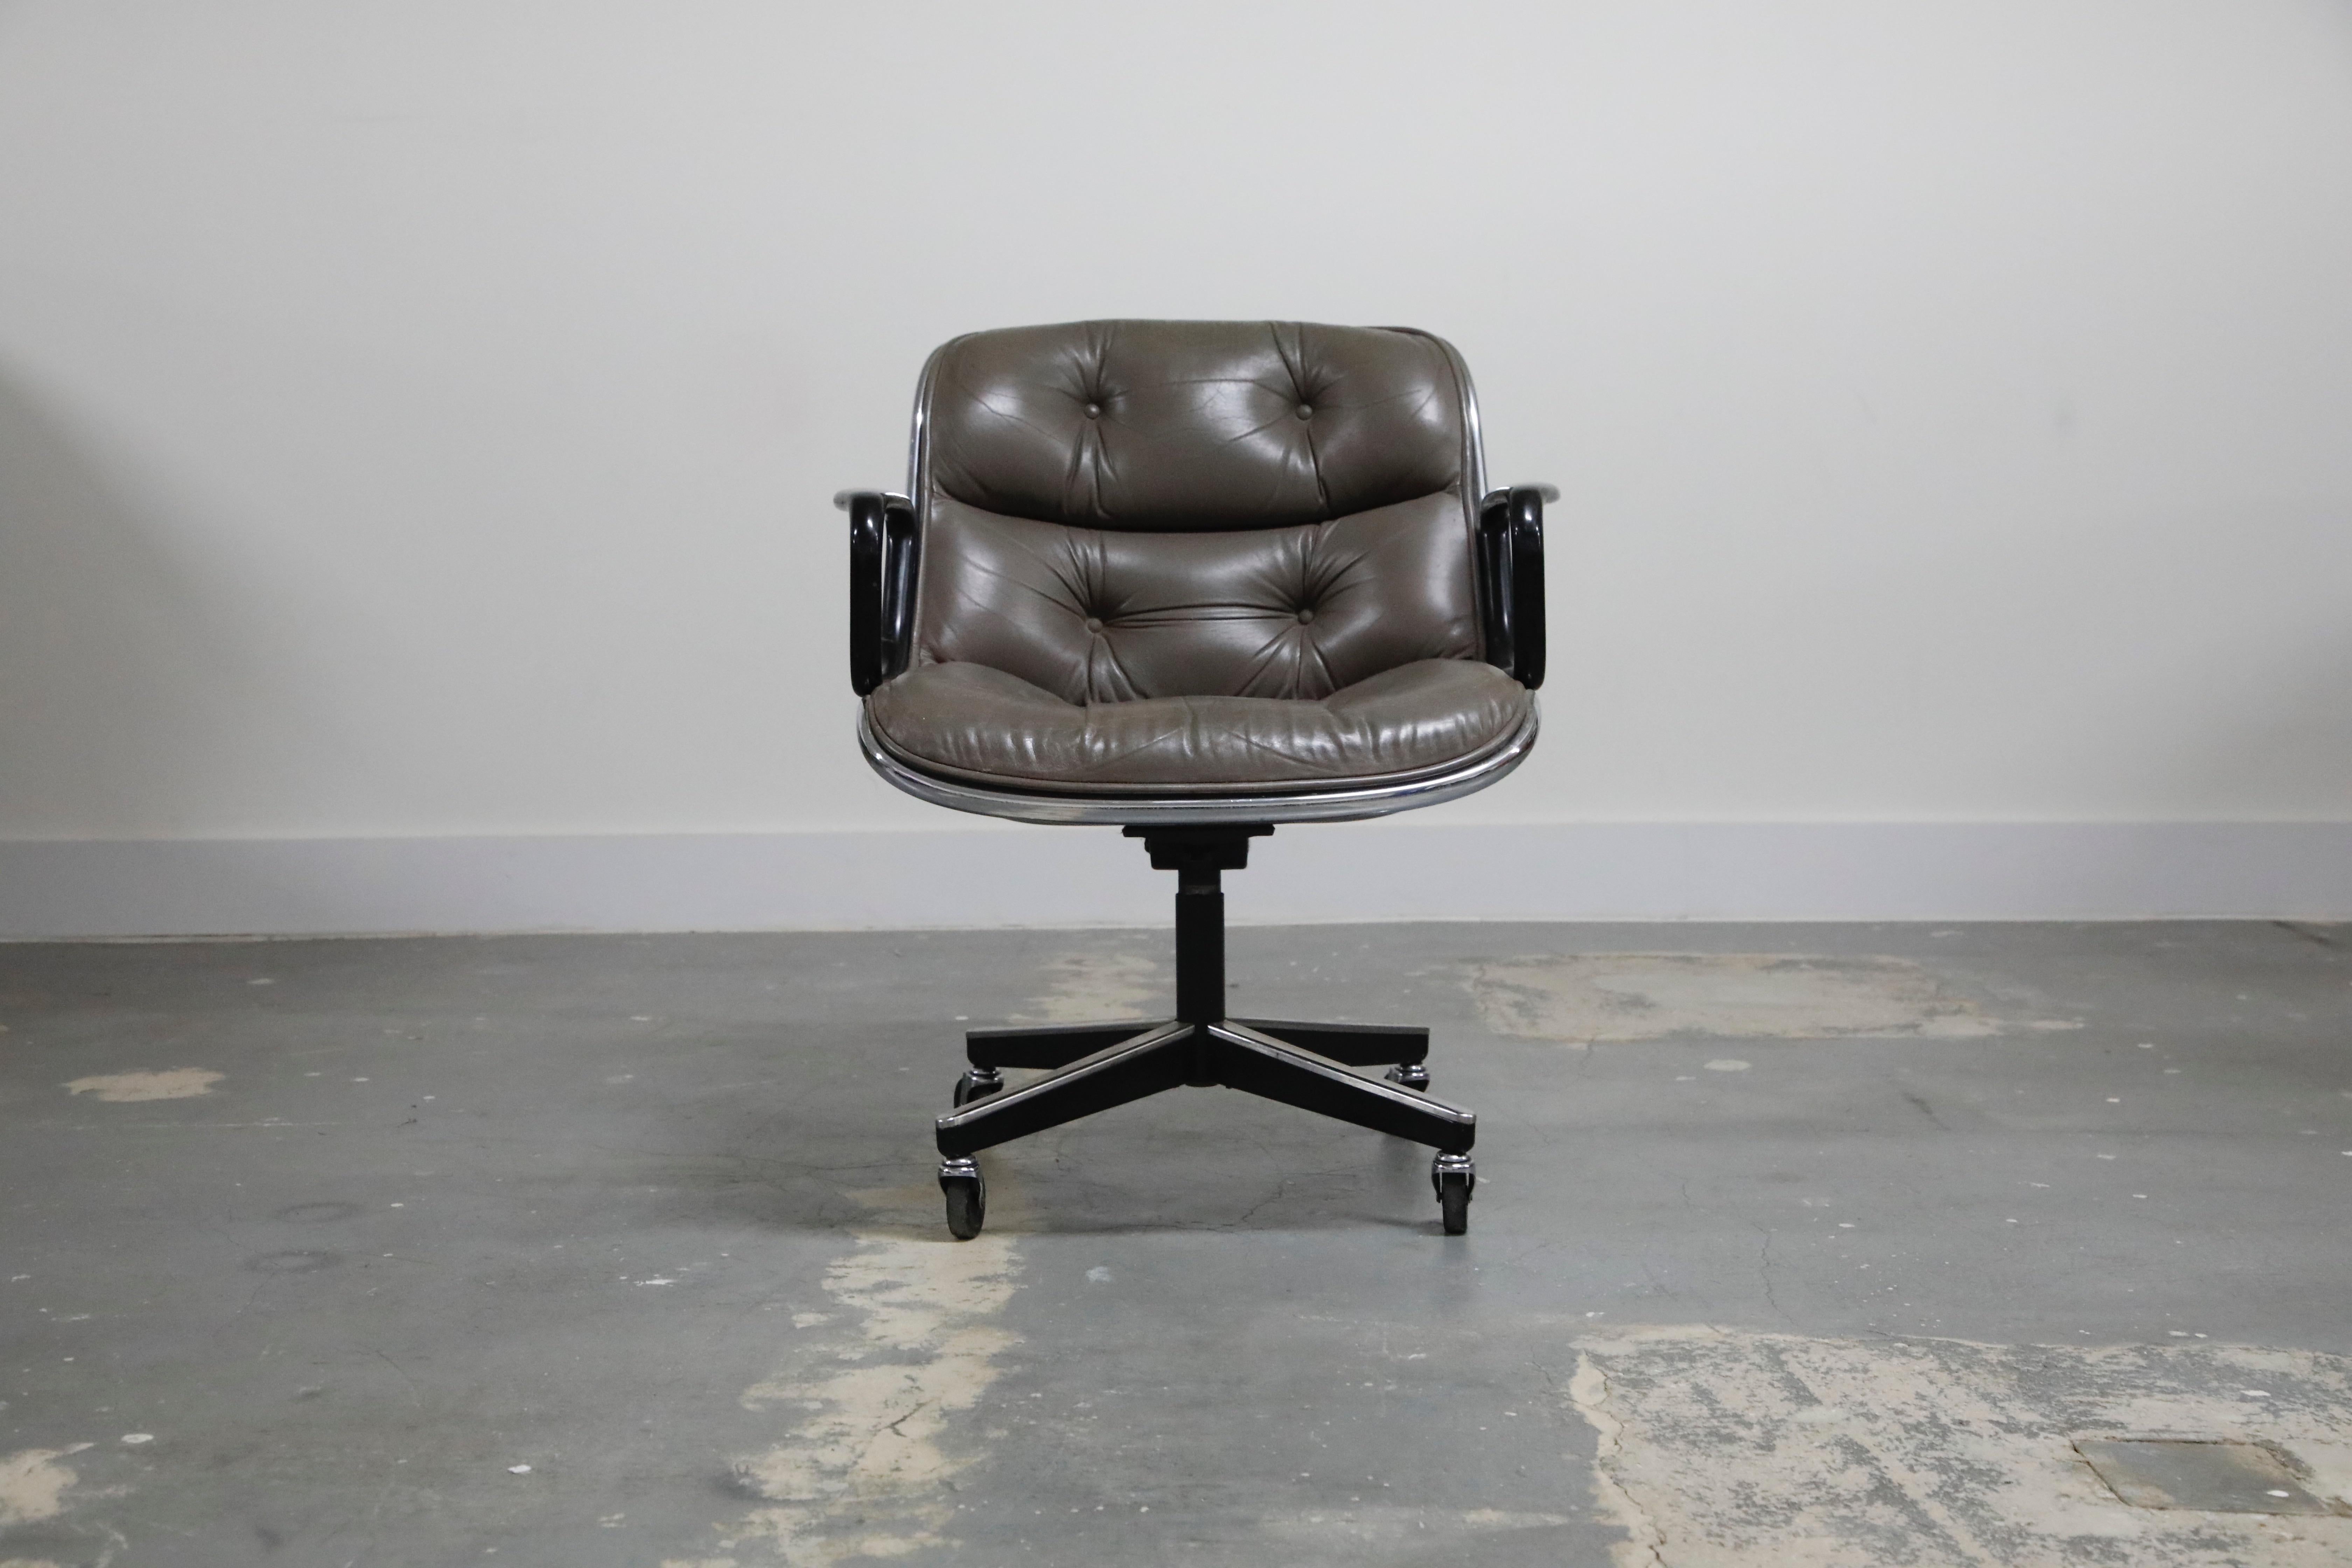 These Charles Pollock executive chairs in a beautiful grey leather with attractive patina and light distressing are early production examples from the earlier years of the design, making these a great option for collectors and interior designers.